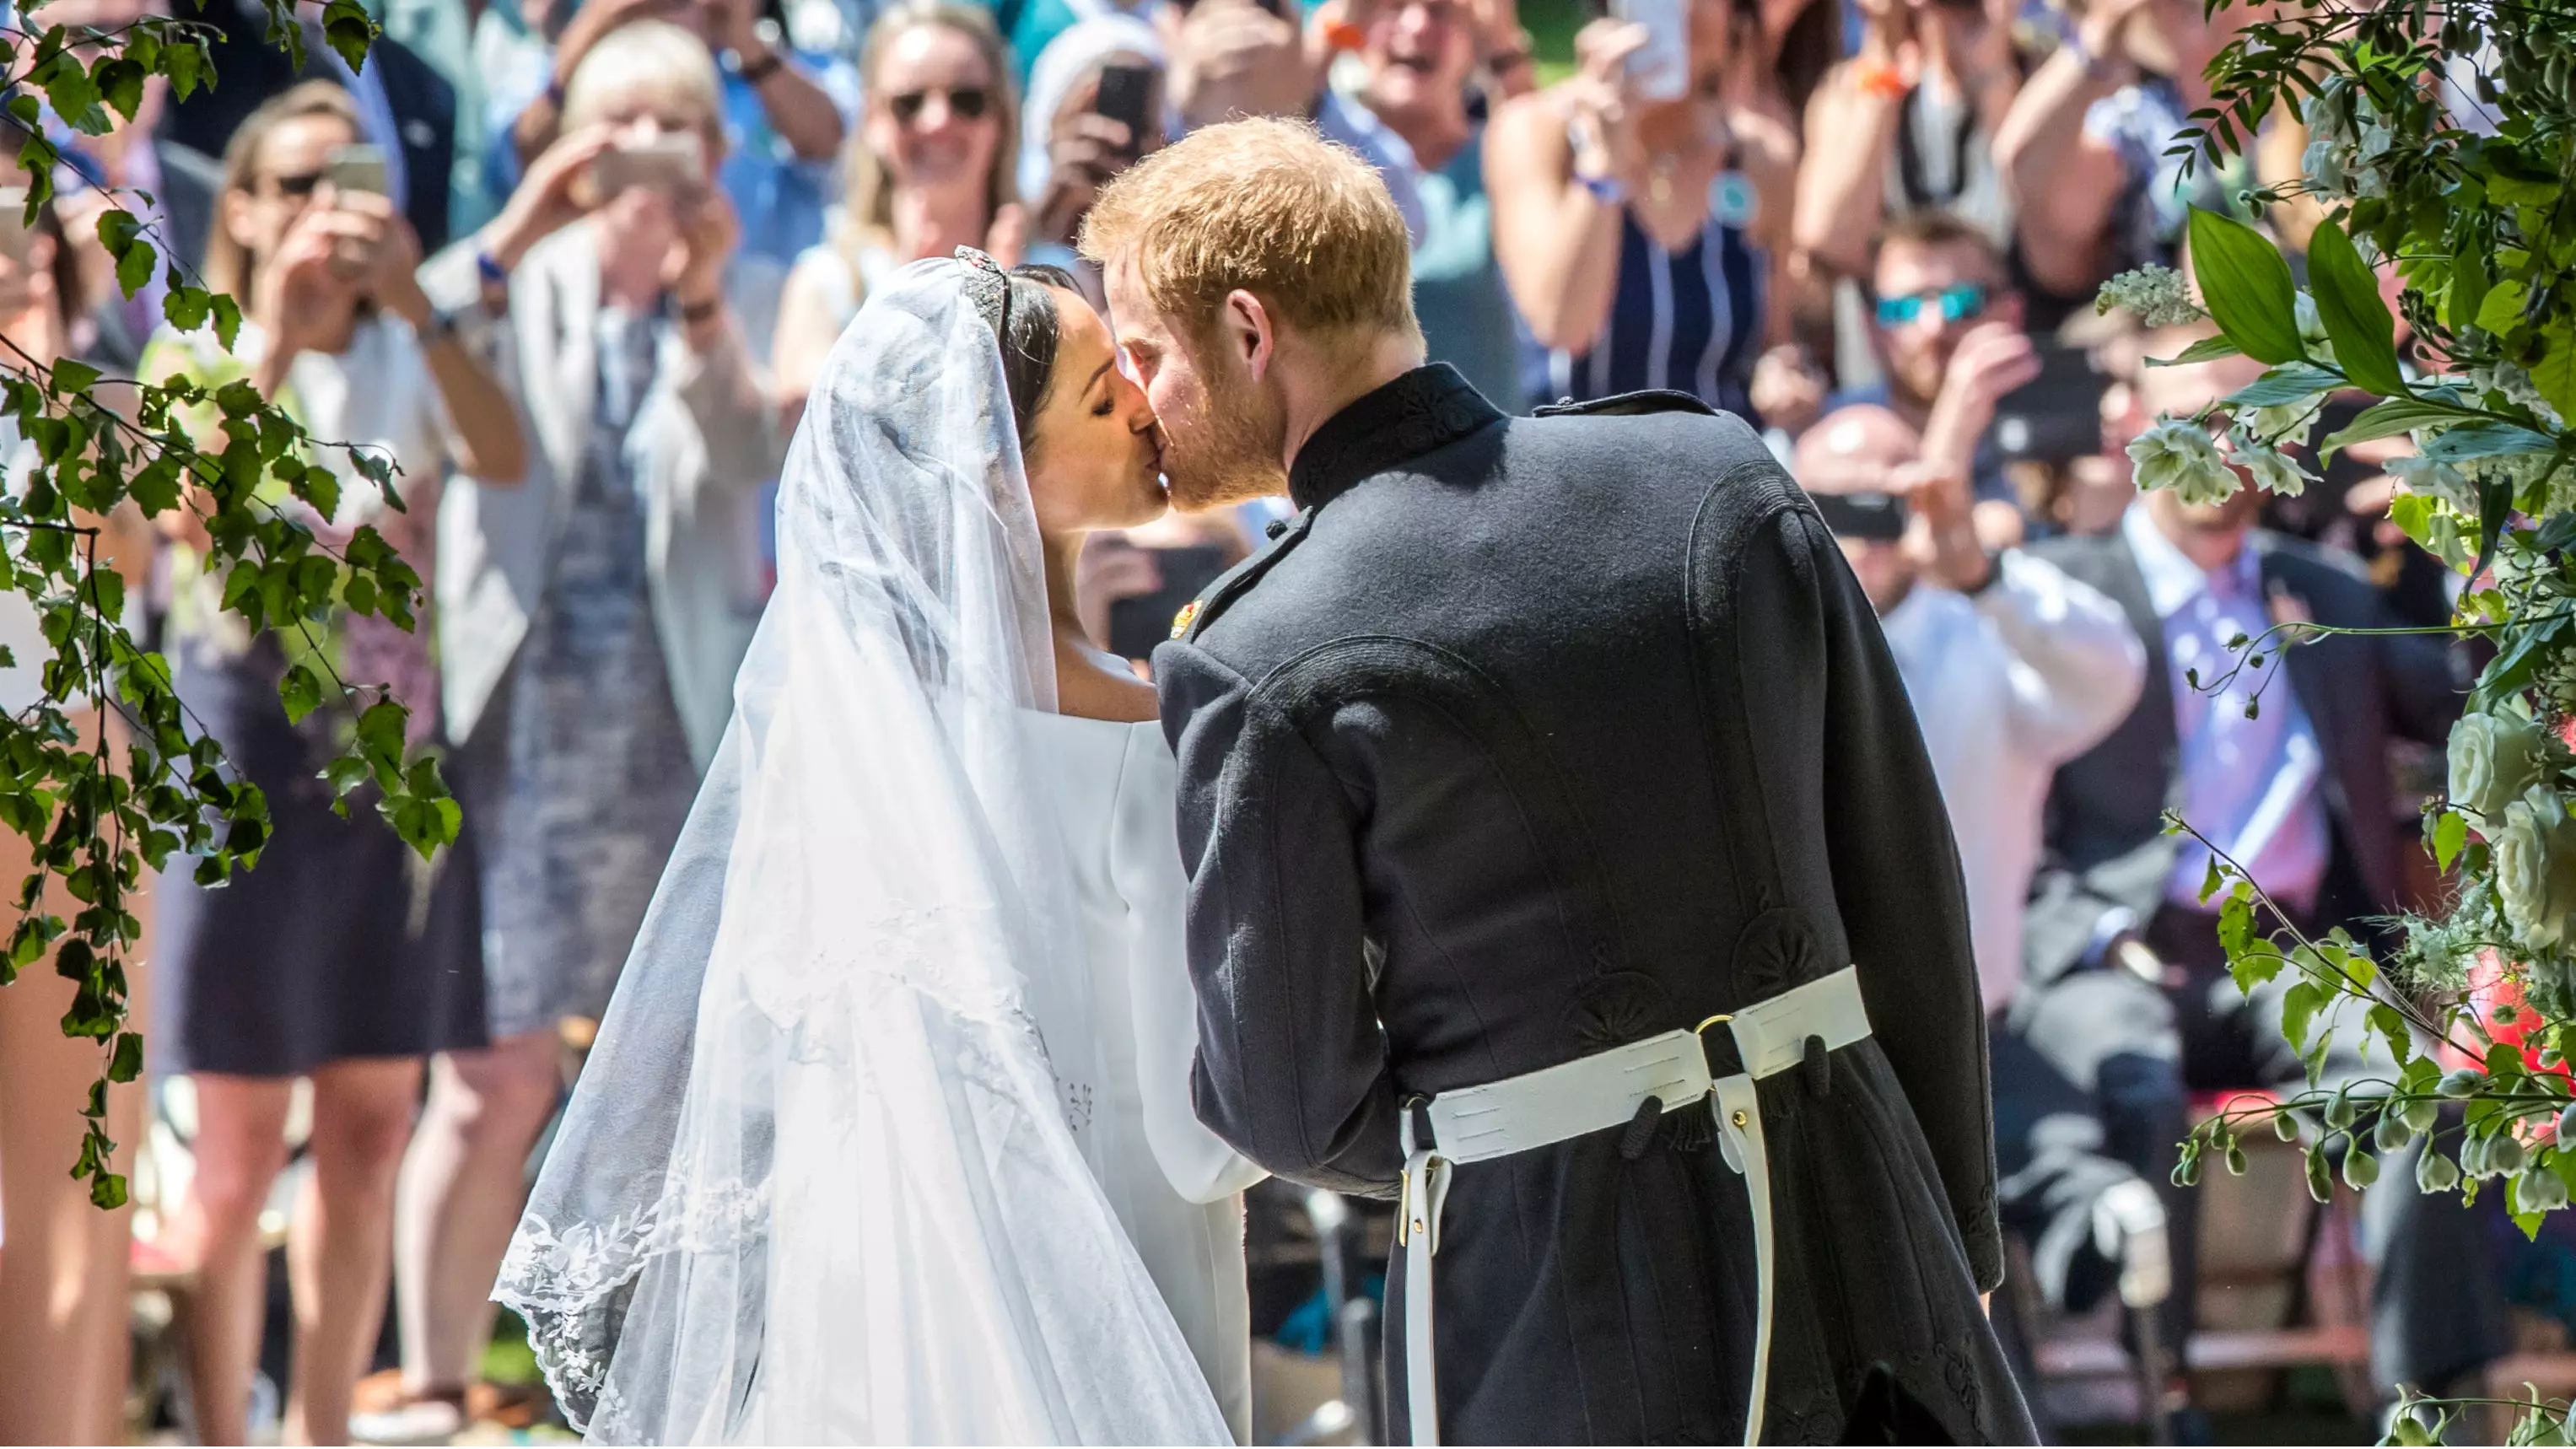 Royal Wedding 2018: Prince Harry and Meghan Markle Share First Kiss As Married Couple